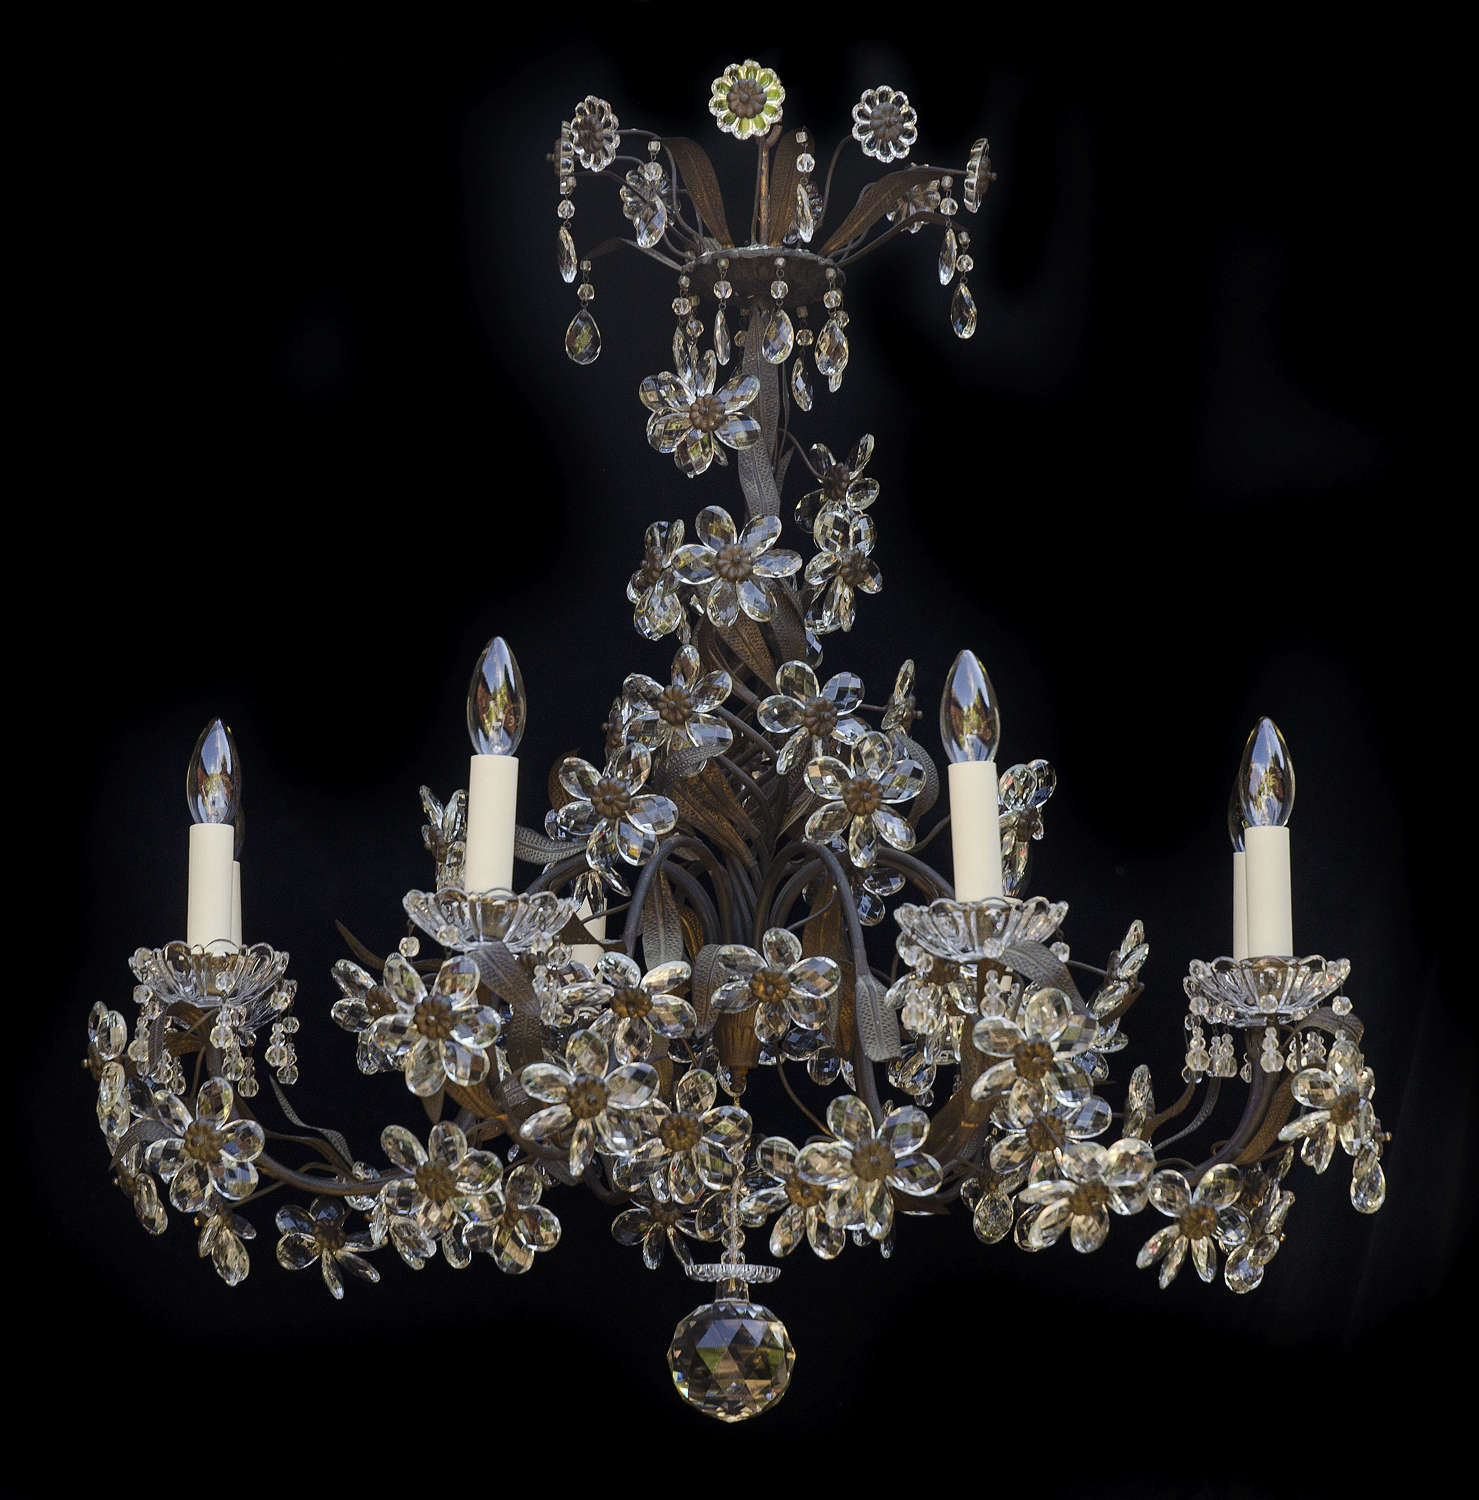 Large 8 light Italian Antique Chandelier with crystal flowers